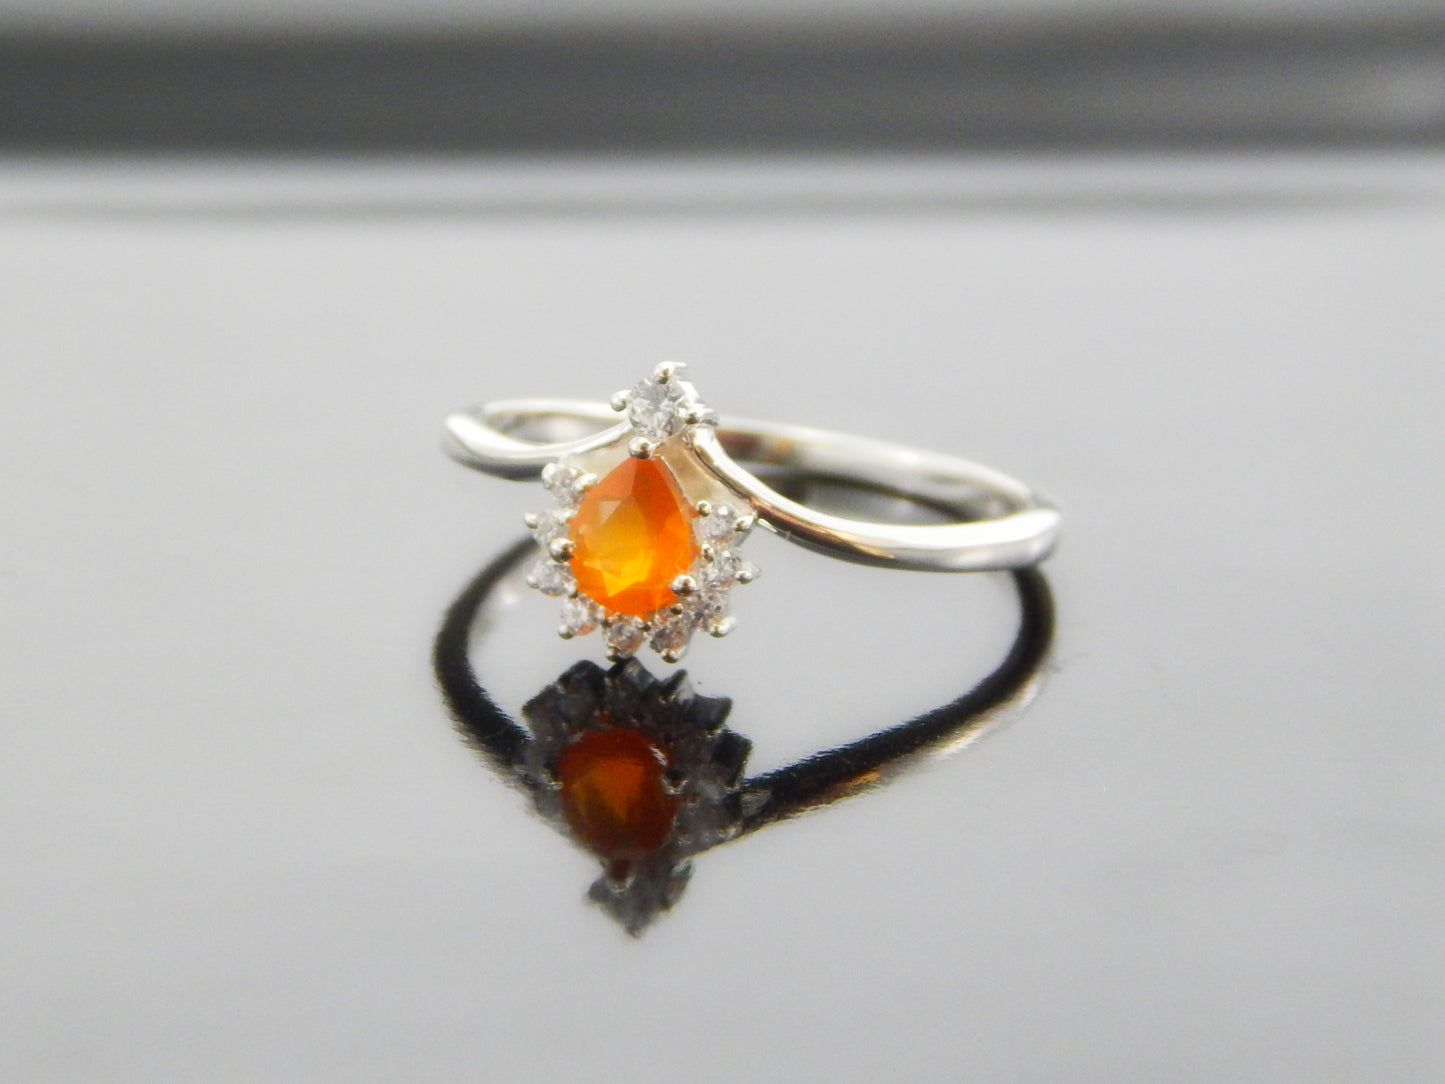 Genuine Mexican Fire Opal Pear Cut Ring in 925 Silver